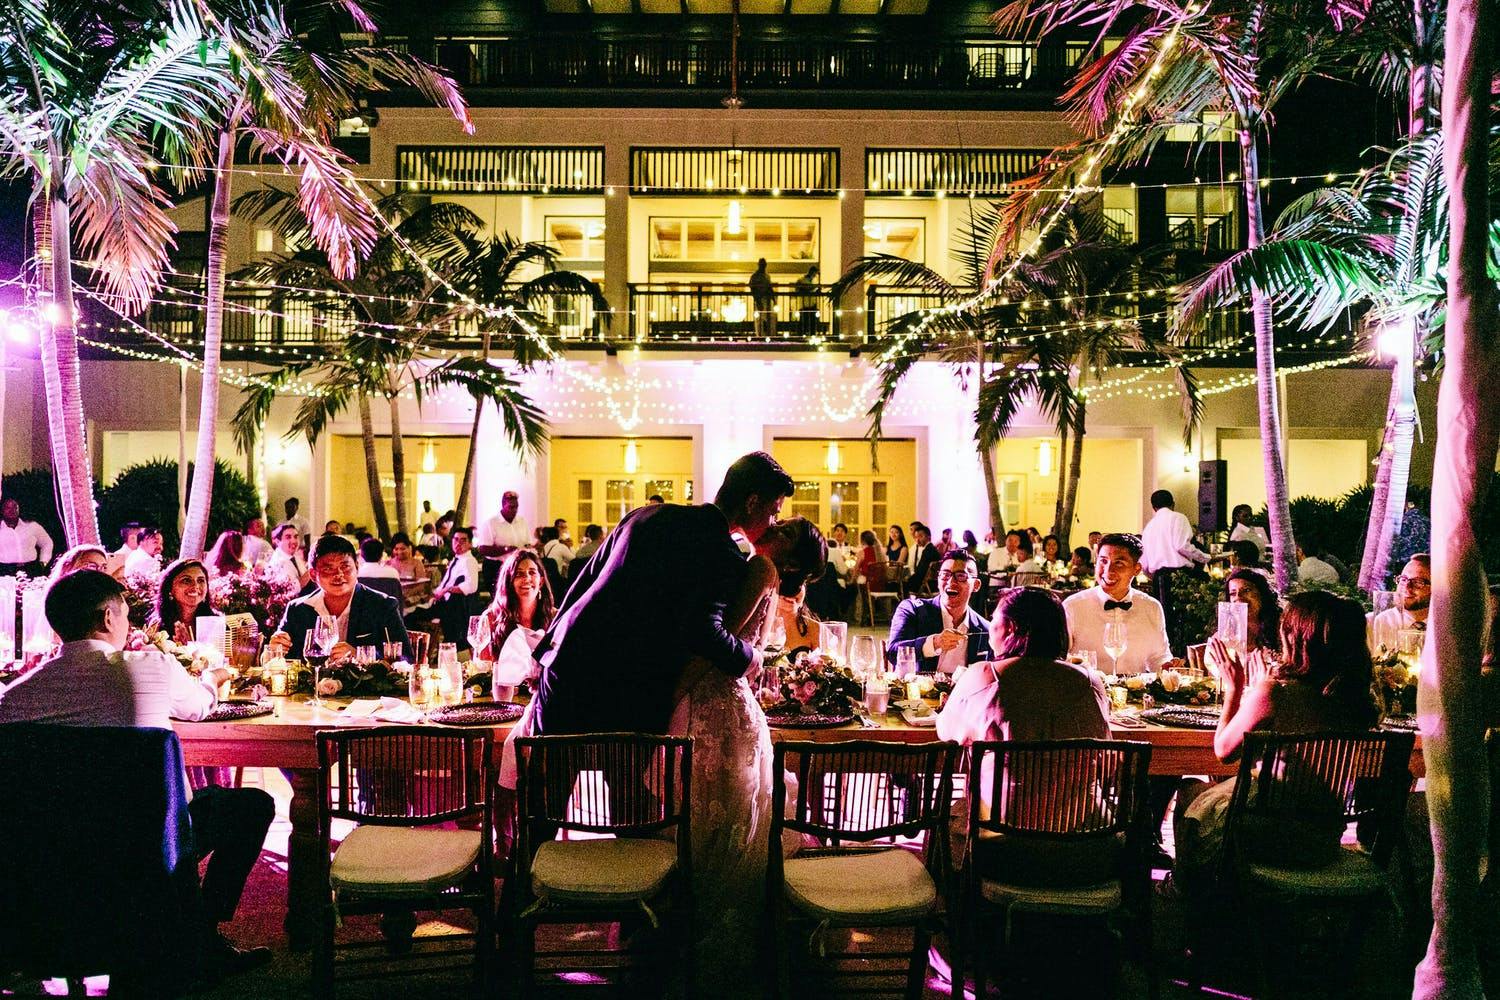 Tropical Courtyard Wedding With Pink Uplit Palm Trees and Overhead Fairy Lights | PartySlate